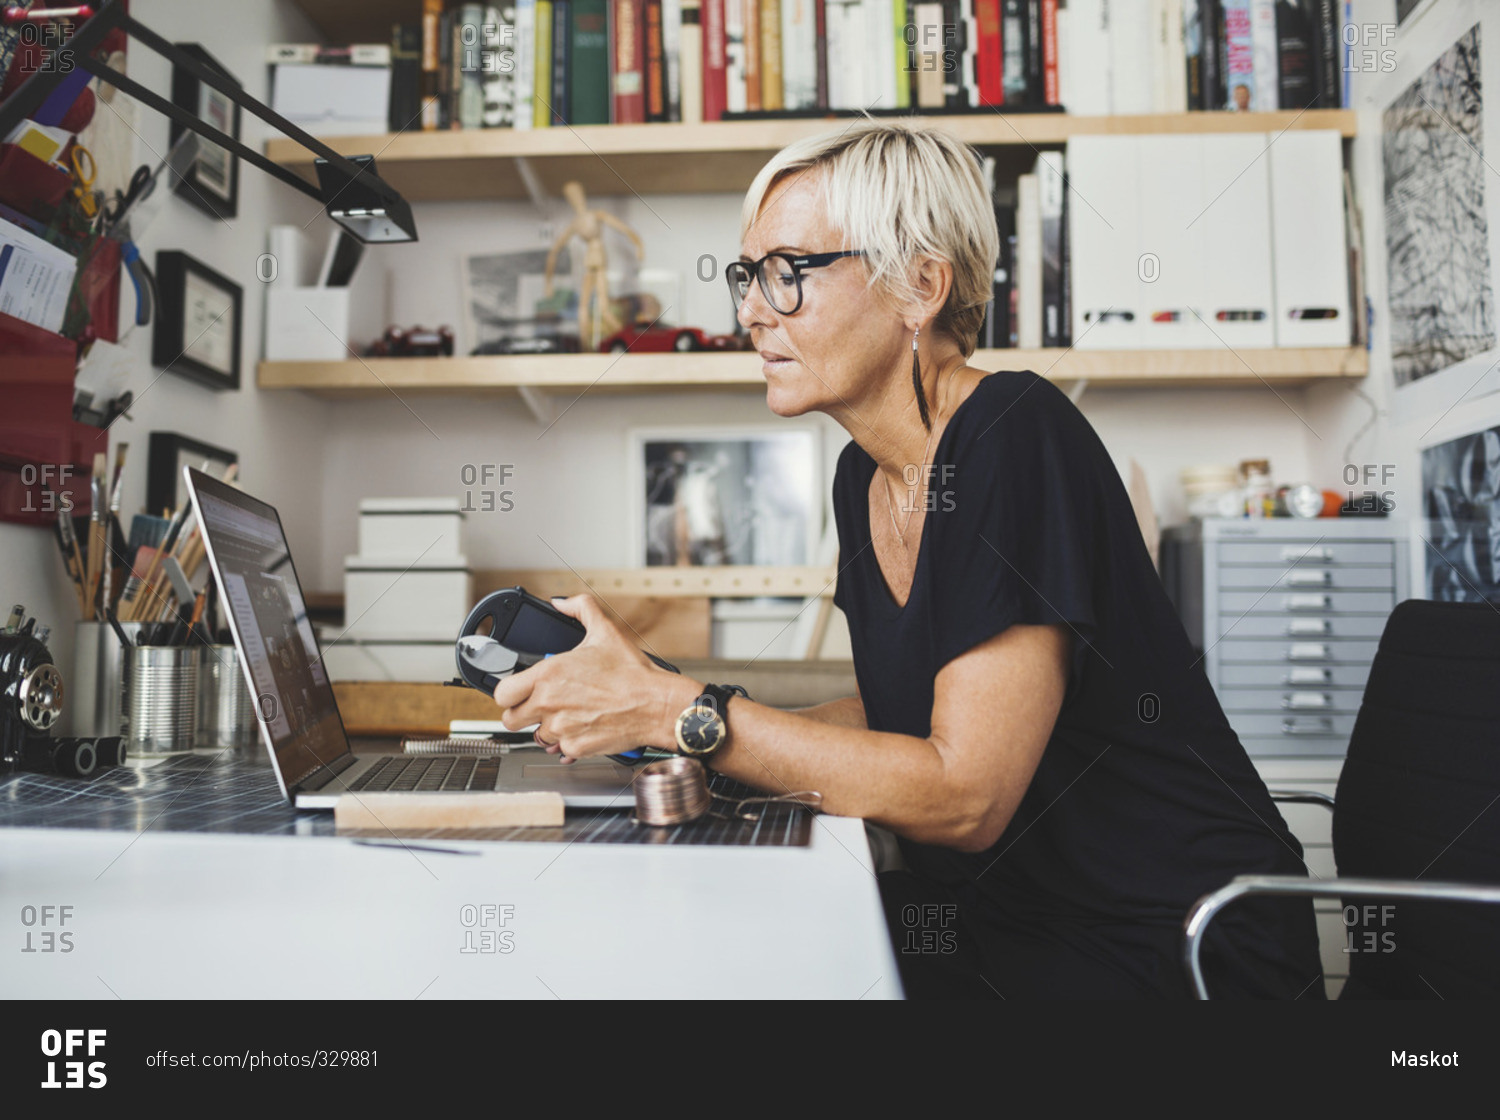 Female industrial designer using laptop while holding product at home office